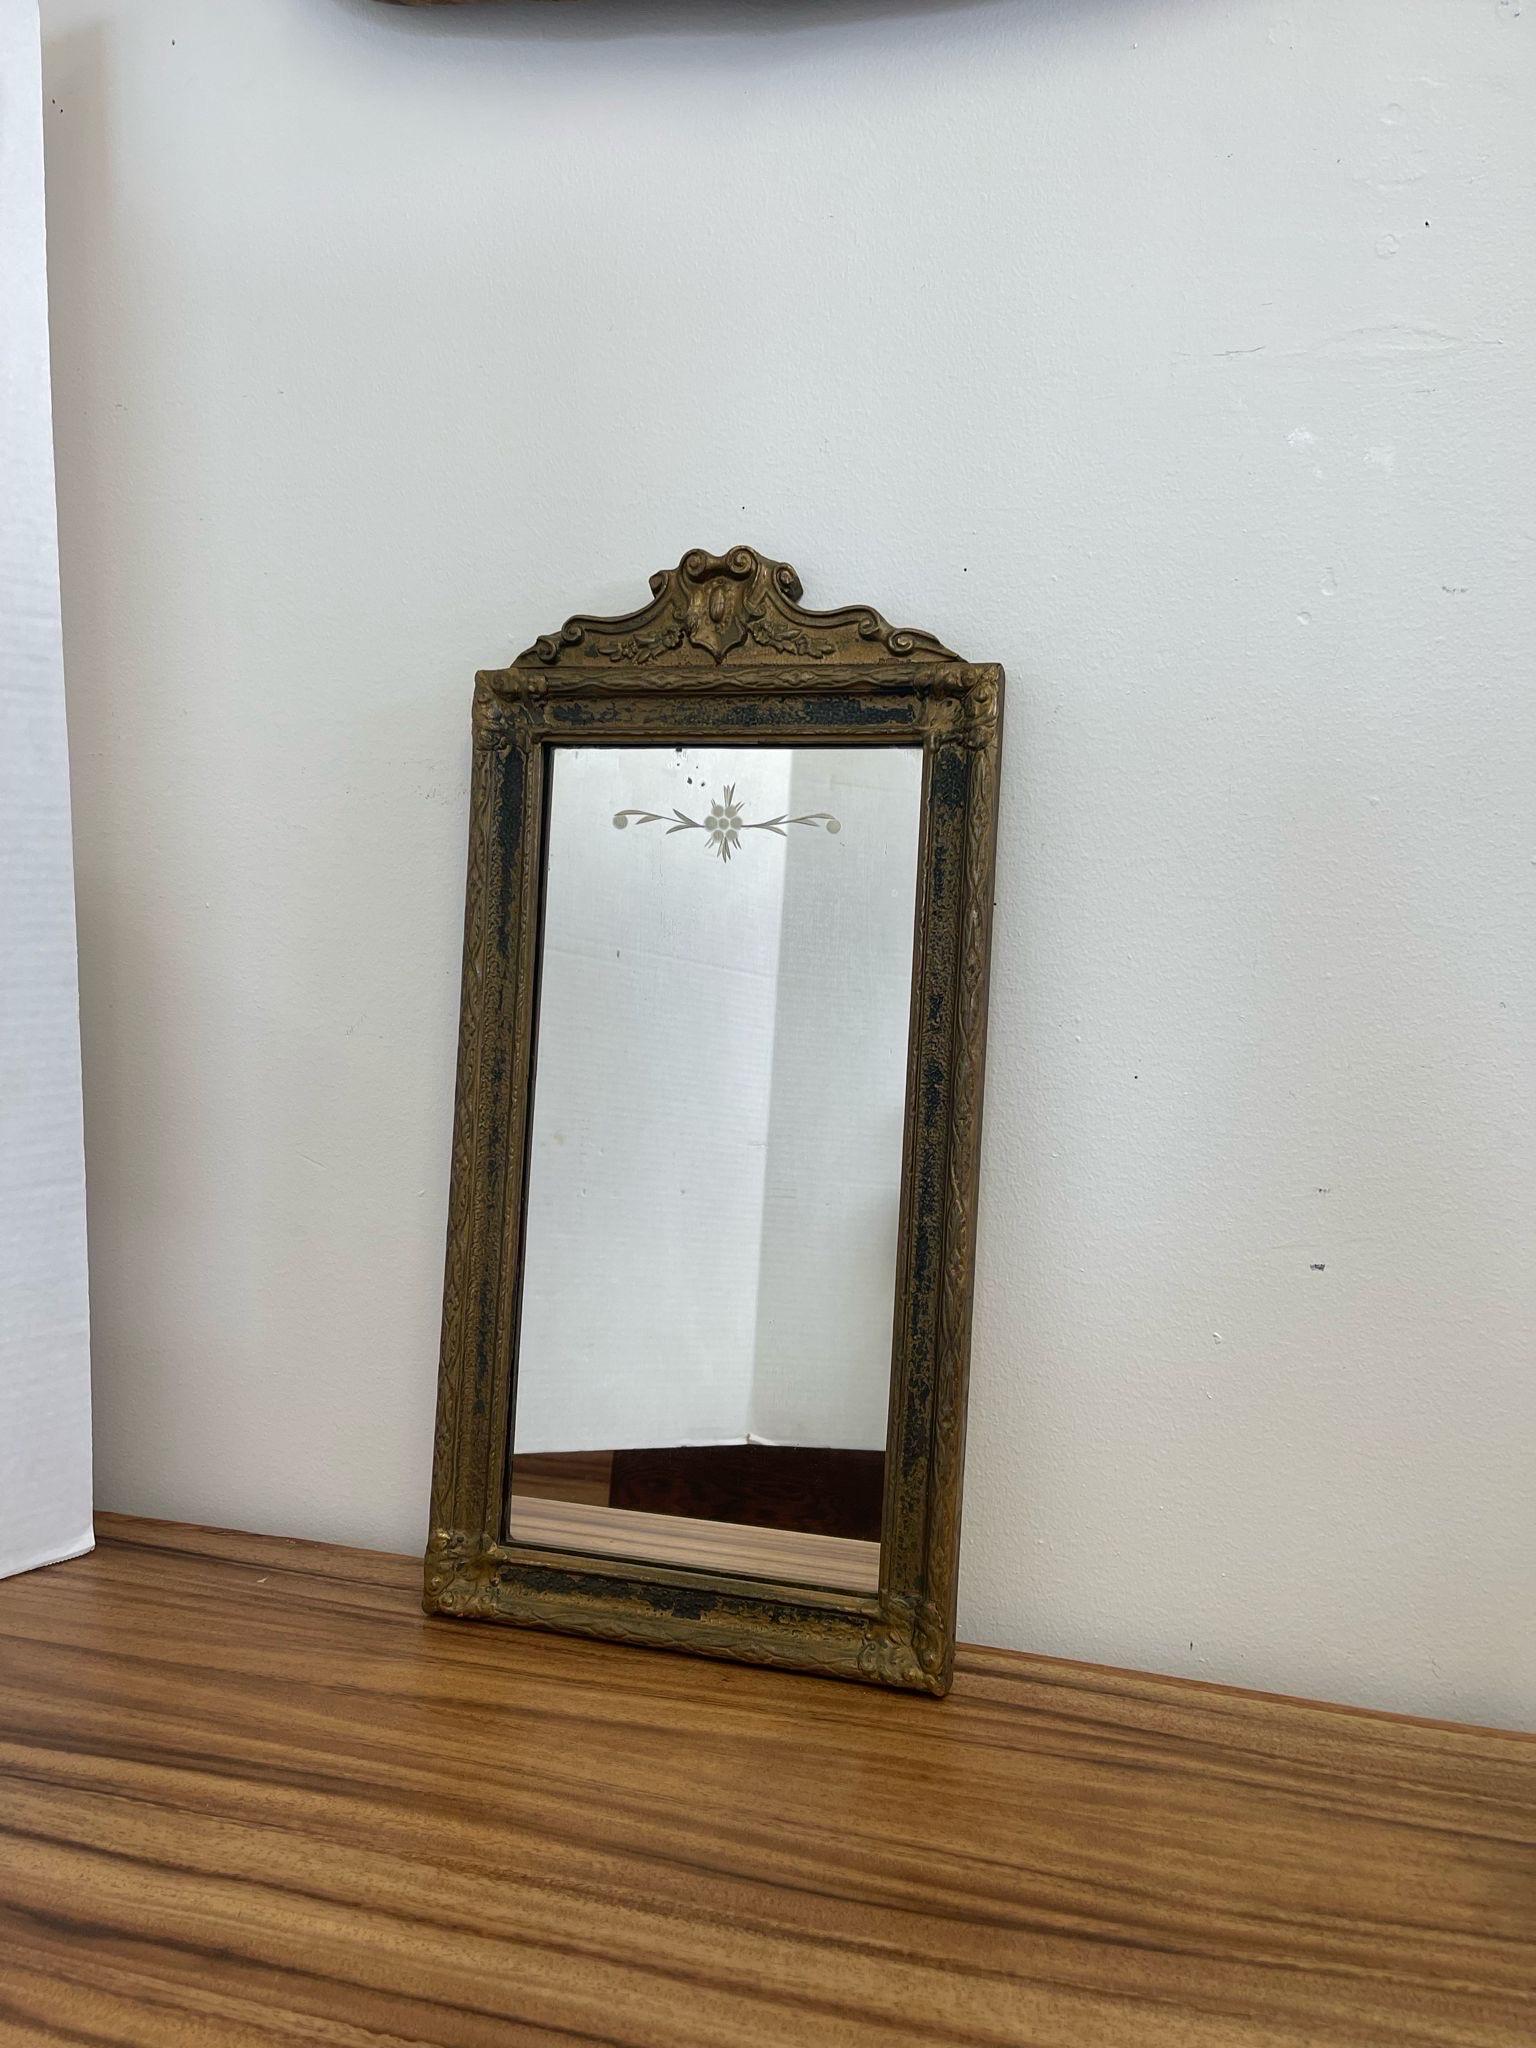 Early 20th Century Antique Arched Sculpted Wood Frame Mirror With Floral Etching. For Sale